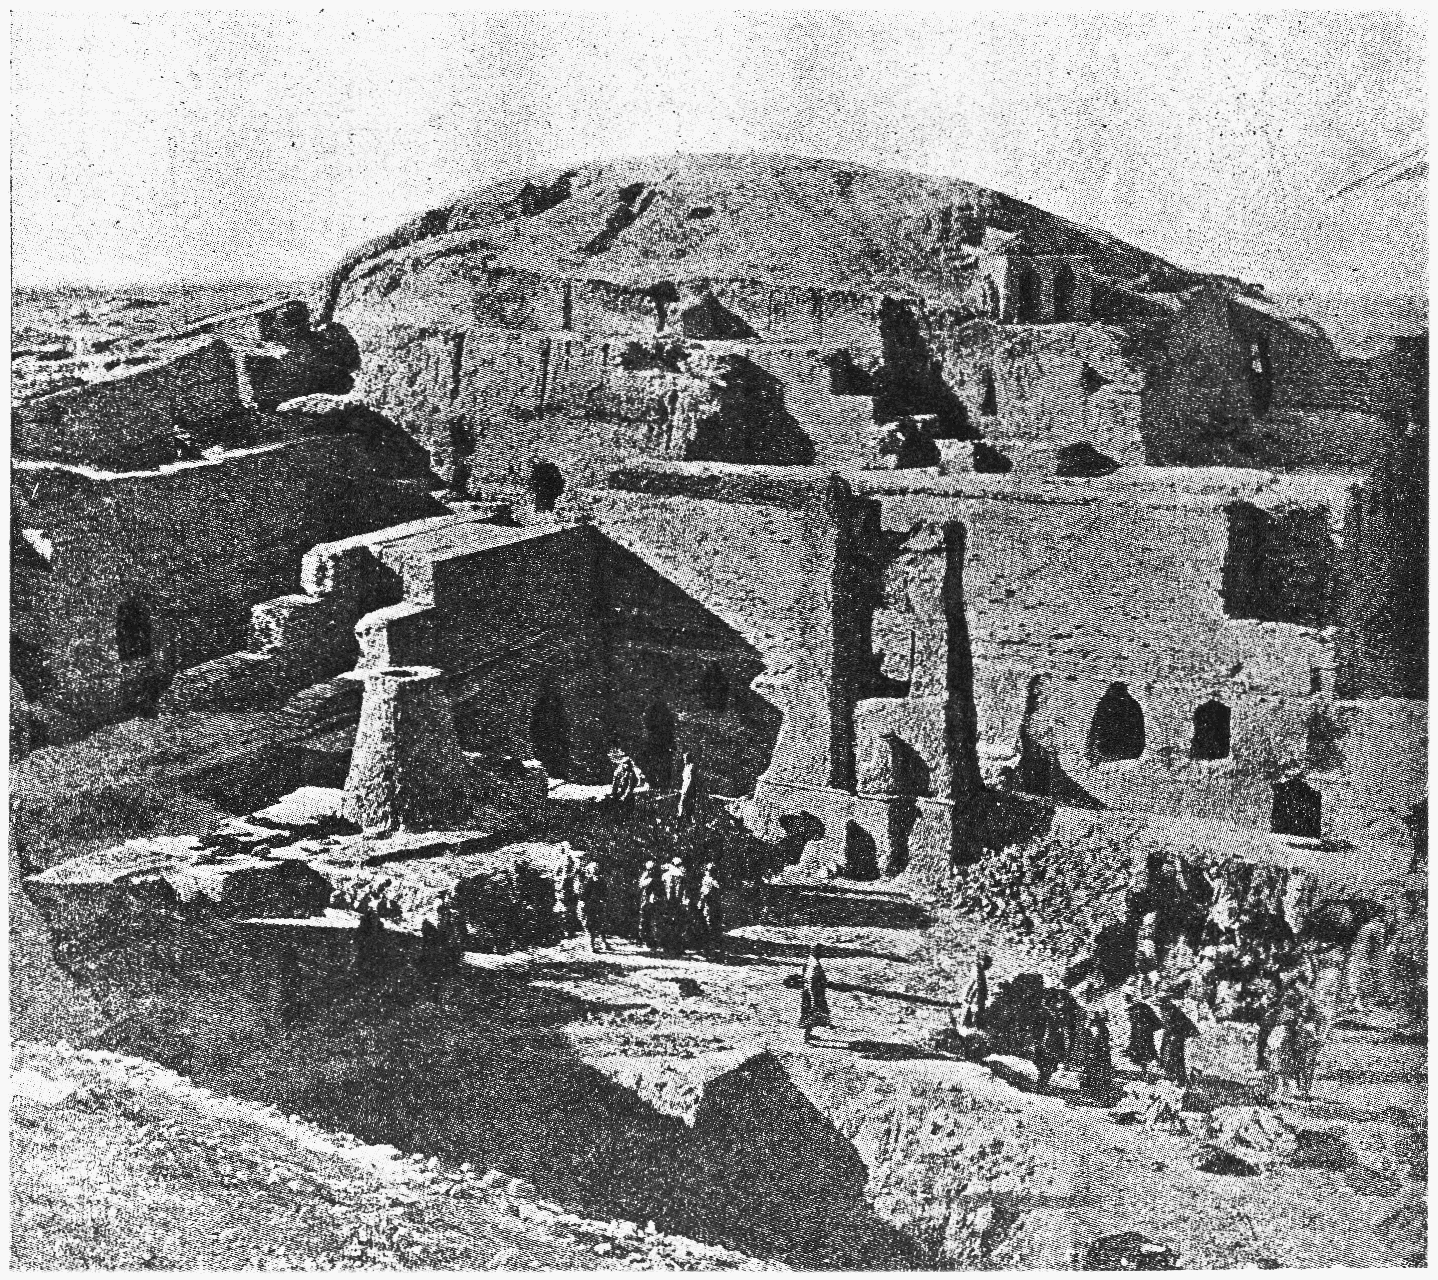 2da - mud brick-built Nippur with some excavation, from the cave to ziggurats in a very short period of time, archaeologists were astonished